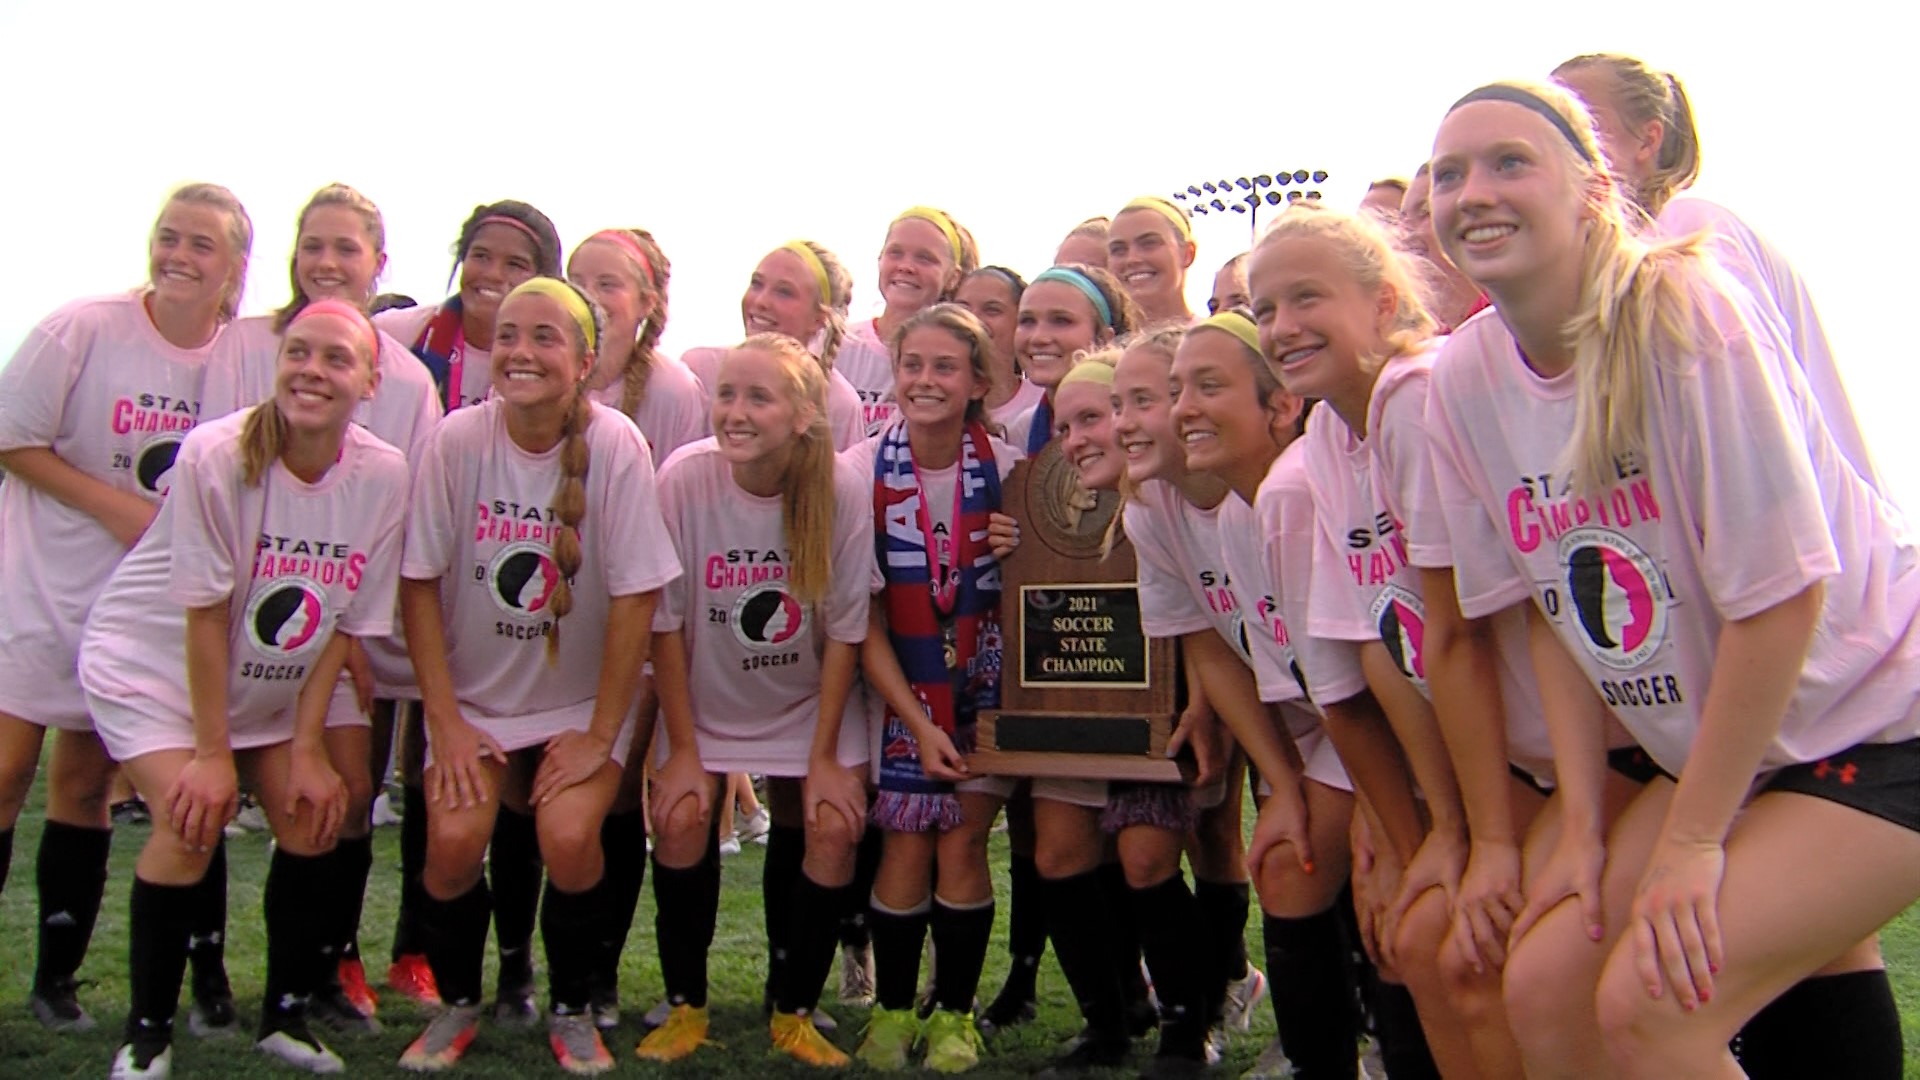 WDM Valley edged defending 3A champions, Ankeny, 1-0 in the 3A title game. It's their seventh championship in girls soccer.